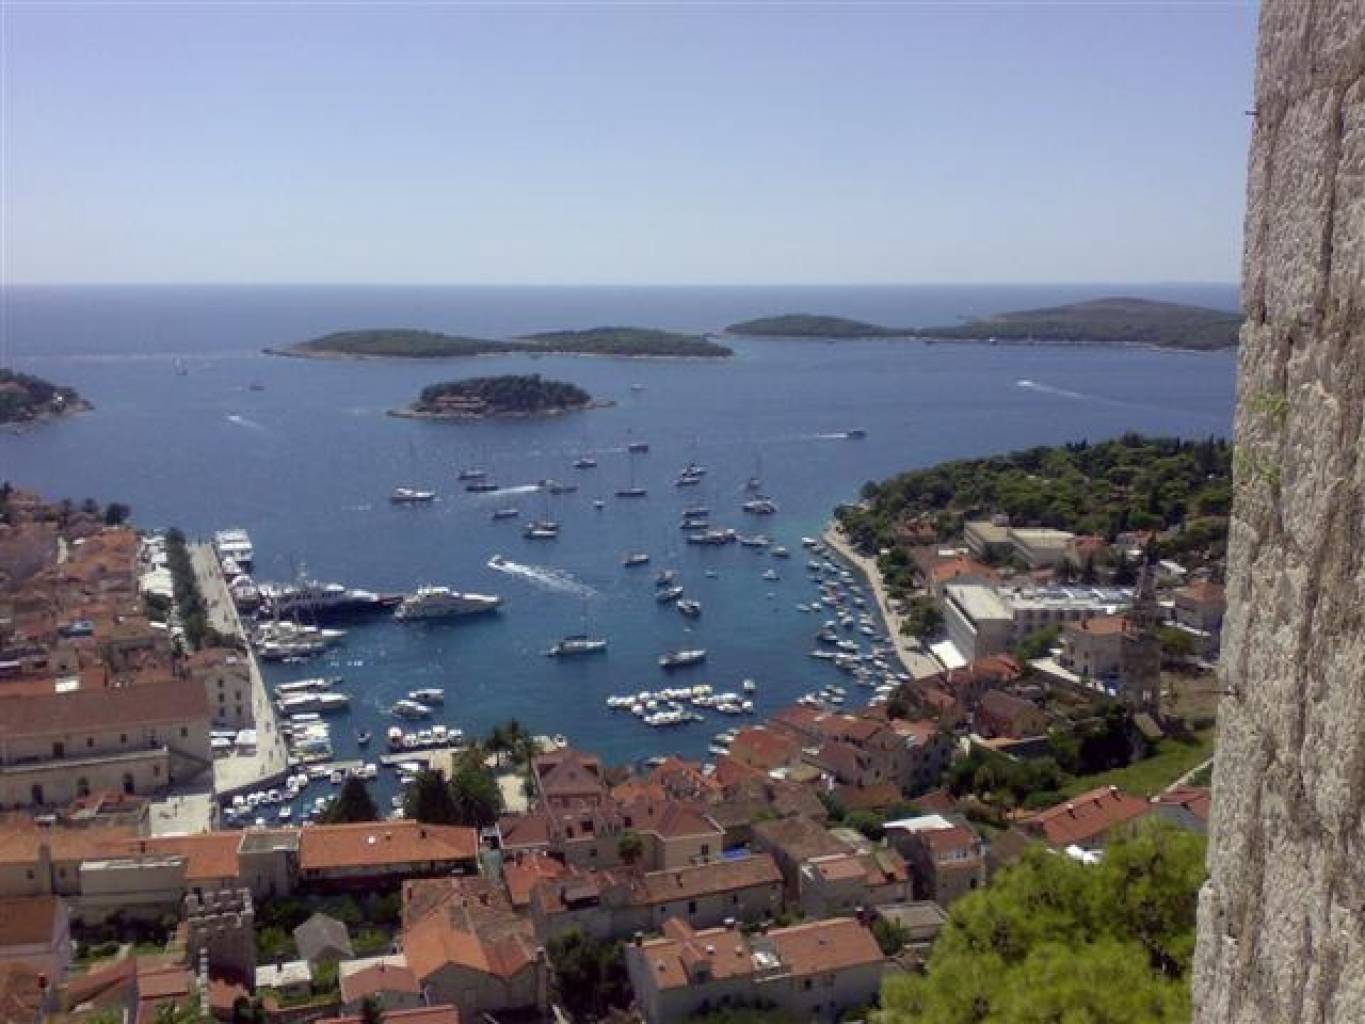 The view from the fortress above Hvar town